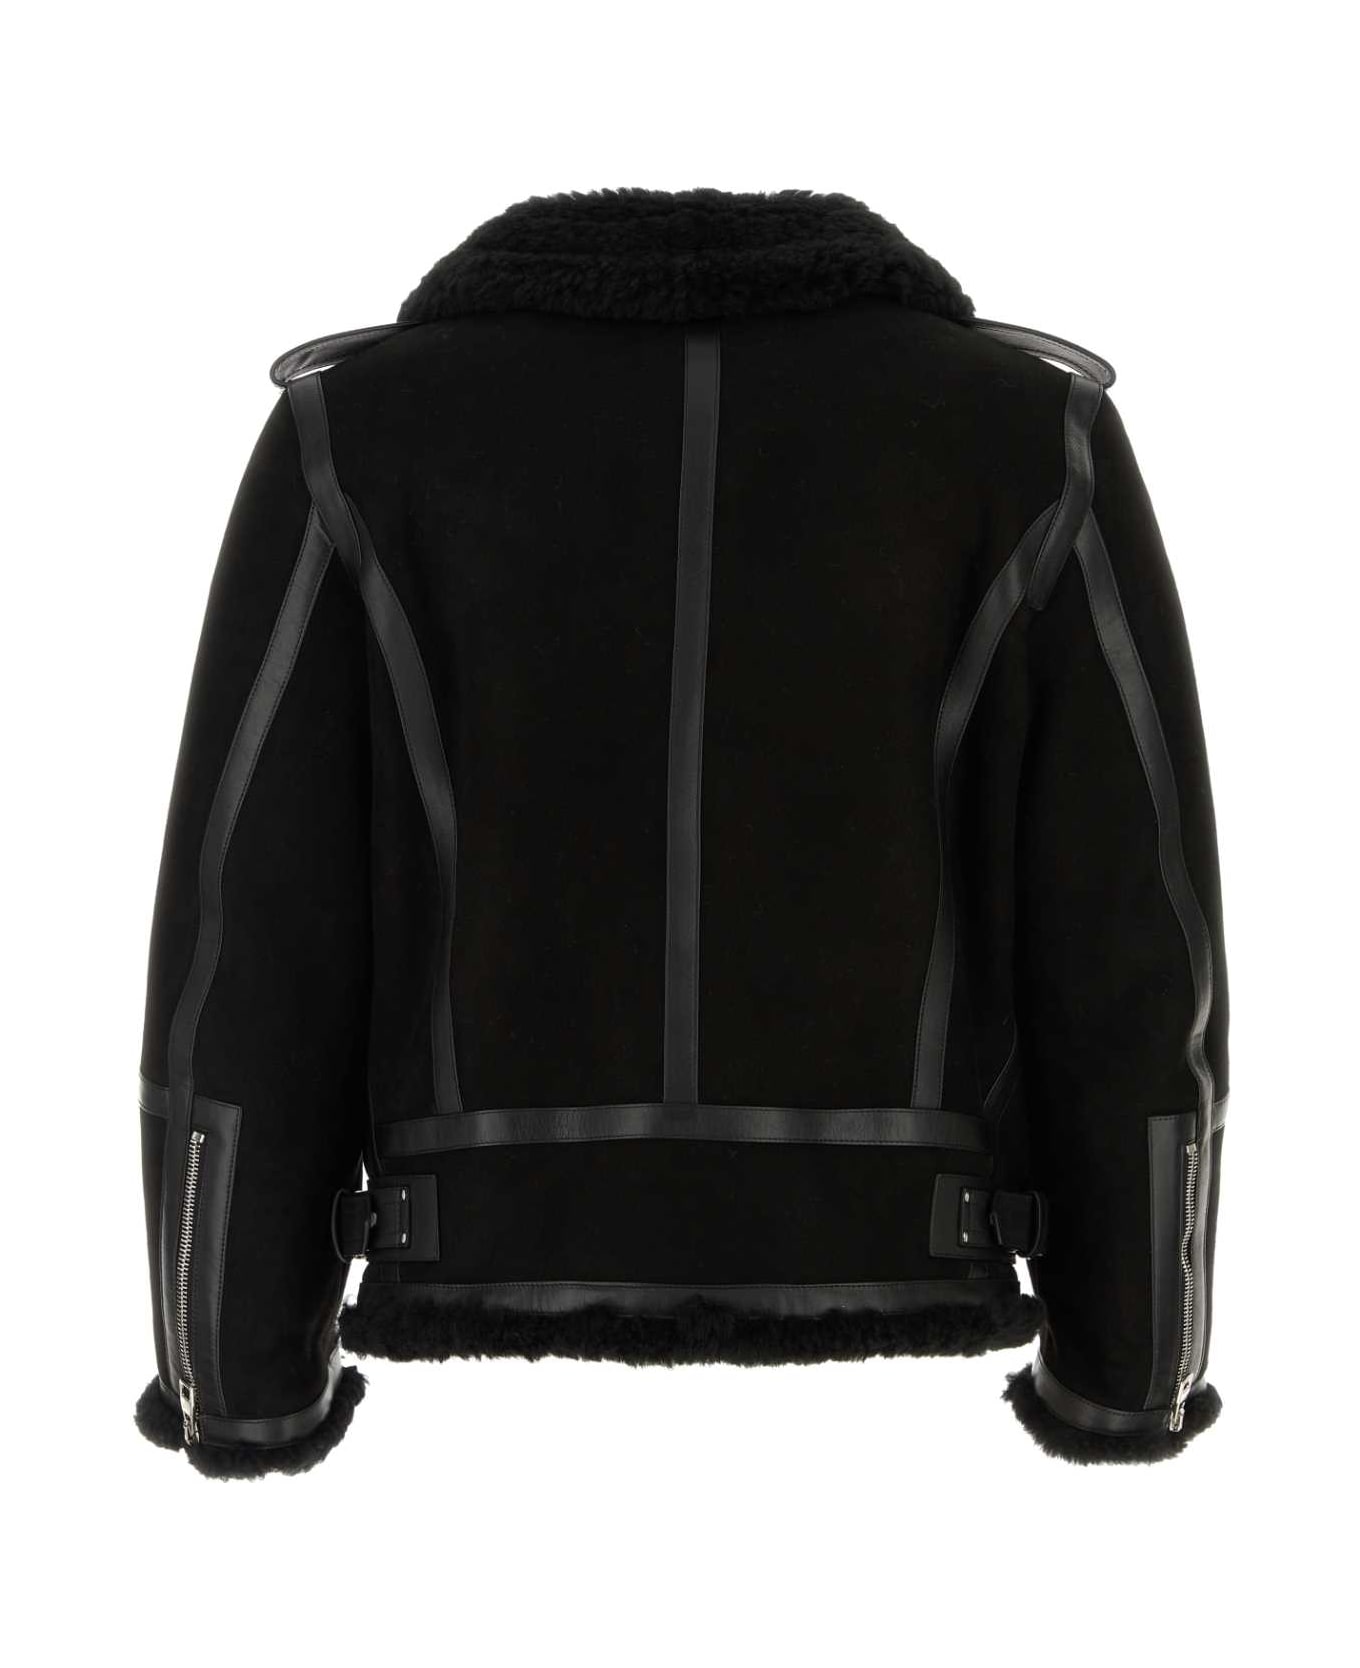 Alexander McQueen Black Shearling And Nappa Leather Jacket - Black